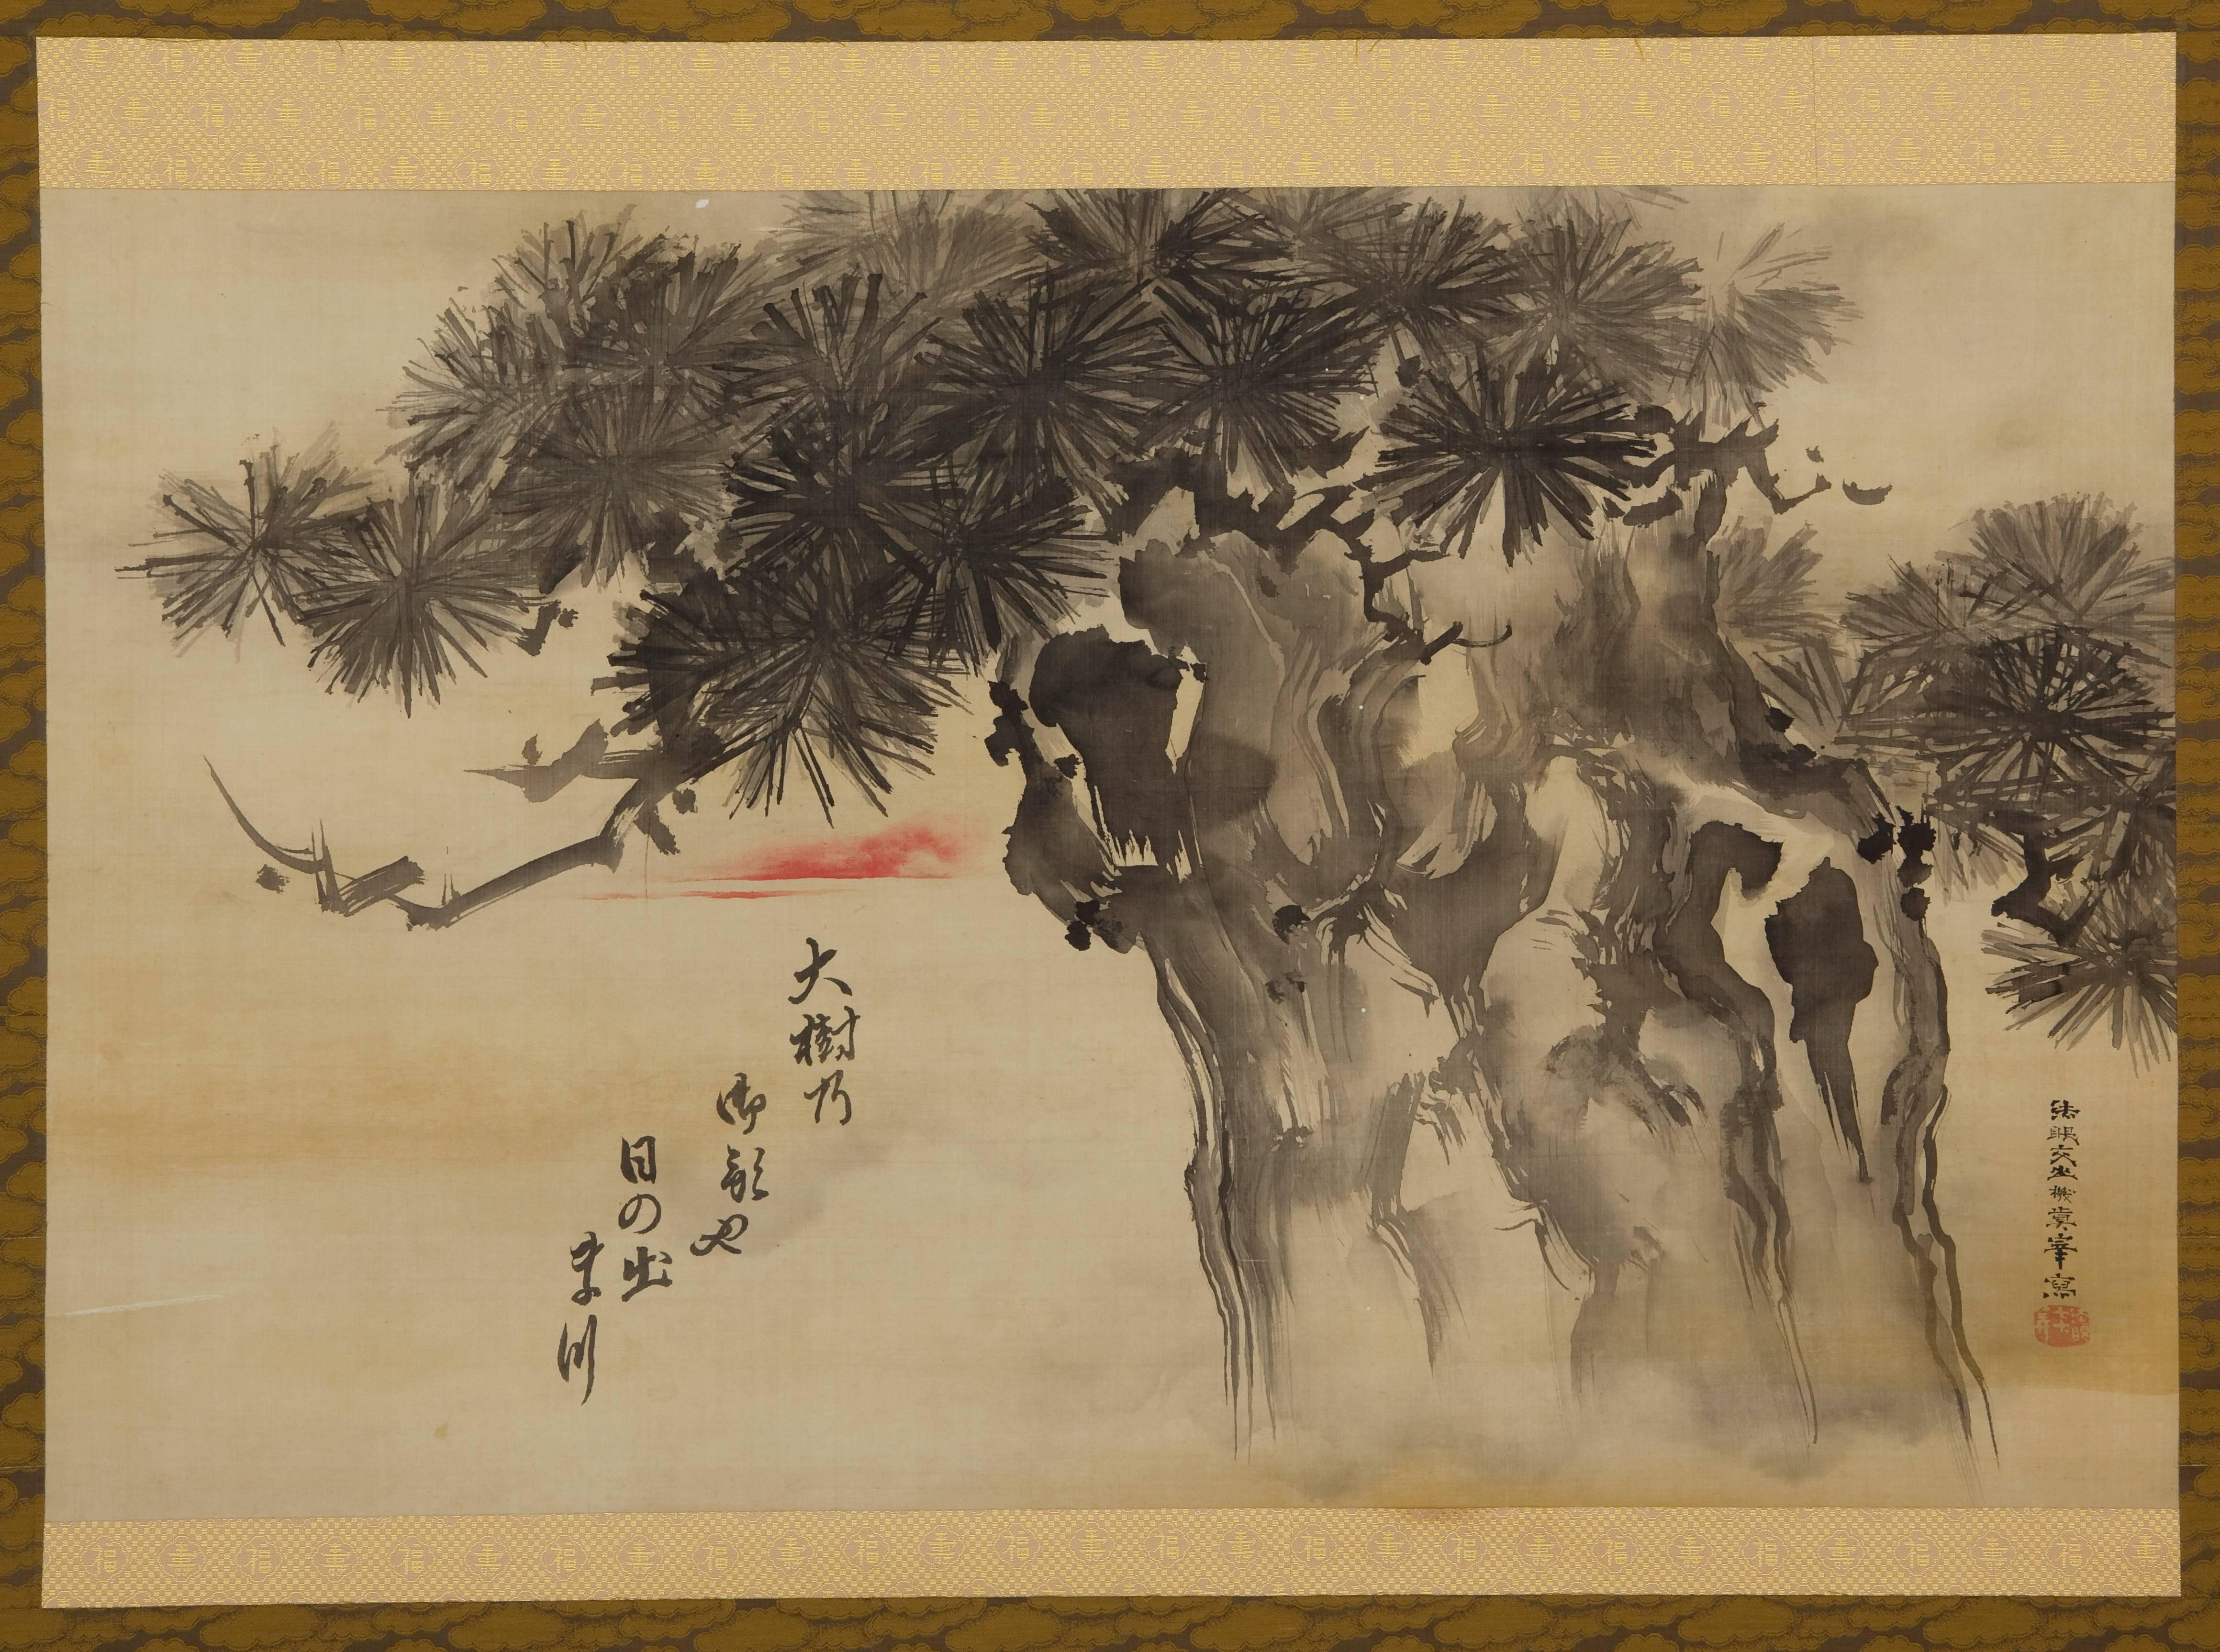 Hanging scroll; ink and colors on silk.

The inscription reads:
Daiju no kage ya Hinode matsu 大樹の影や日の出まつ 
(“Shelter of a big tree”: A pine at sunrise)

This is a reference to the proverb Yoraba daiju no kage 寄らば大樹の陰 (If you want shelter, look